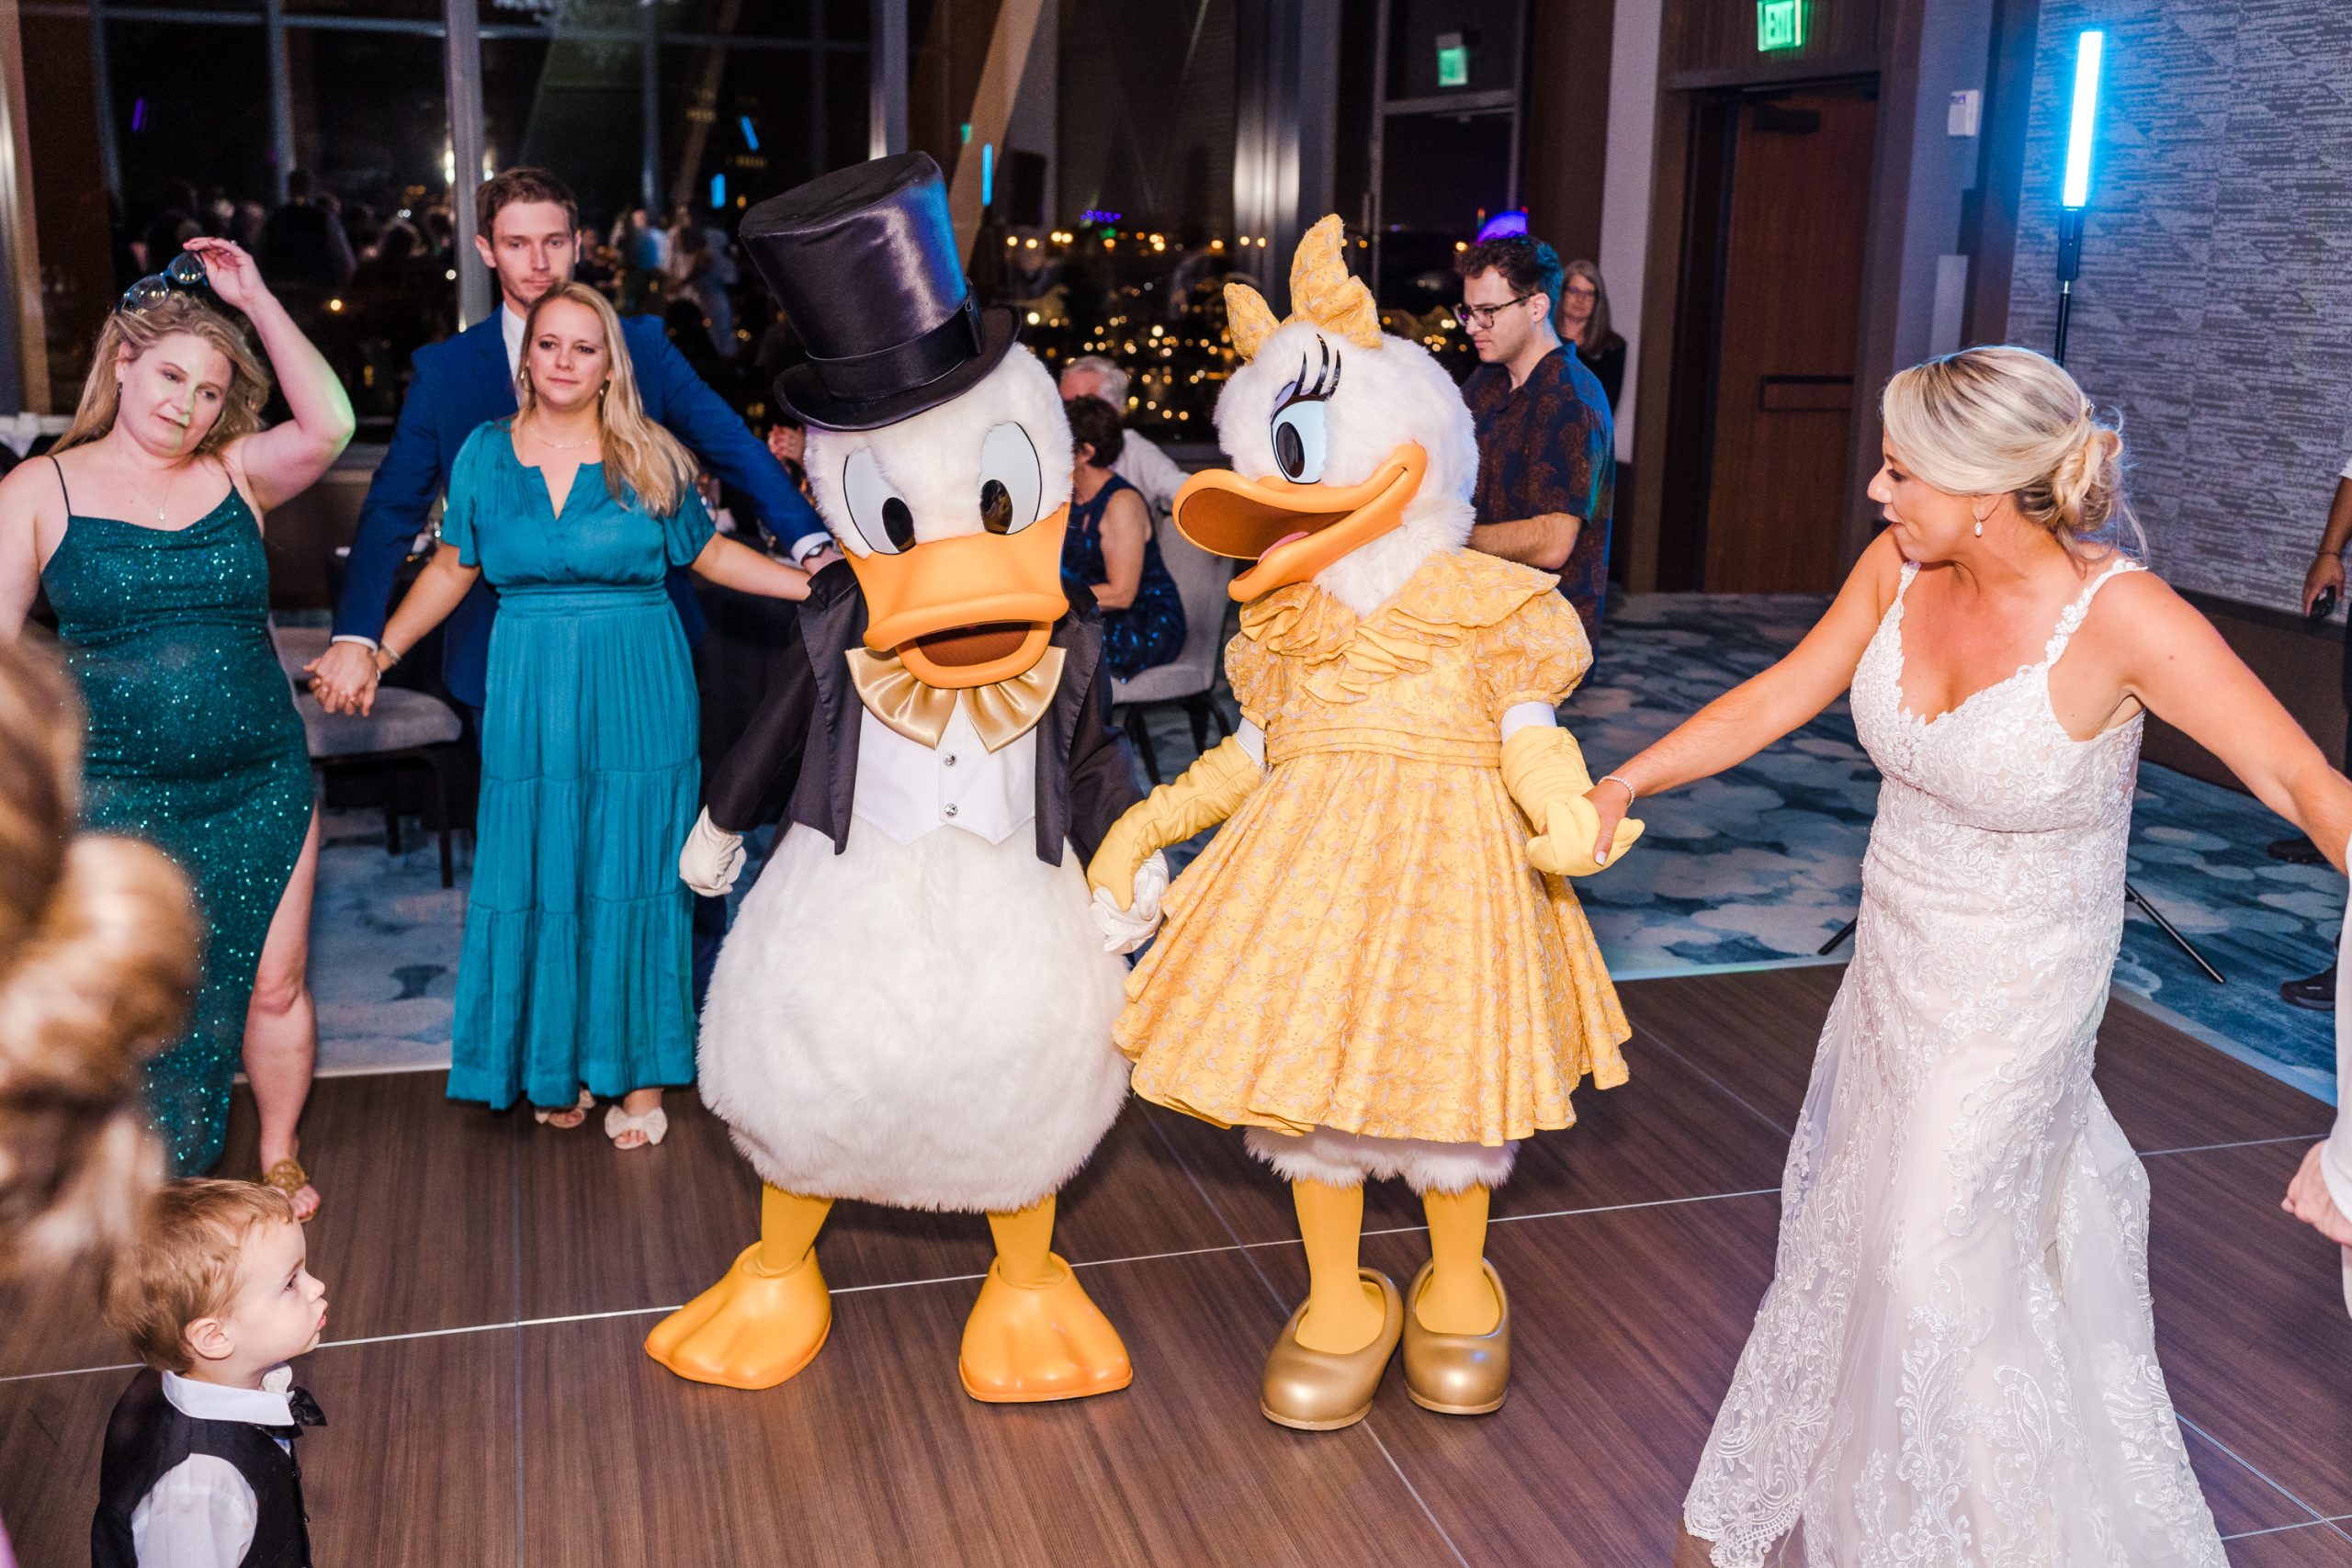 Donald and Daisy Duck dancing with bride